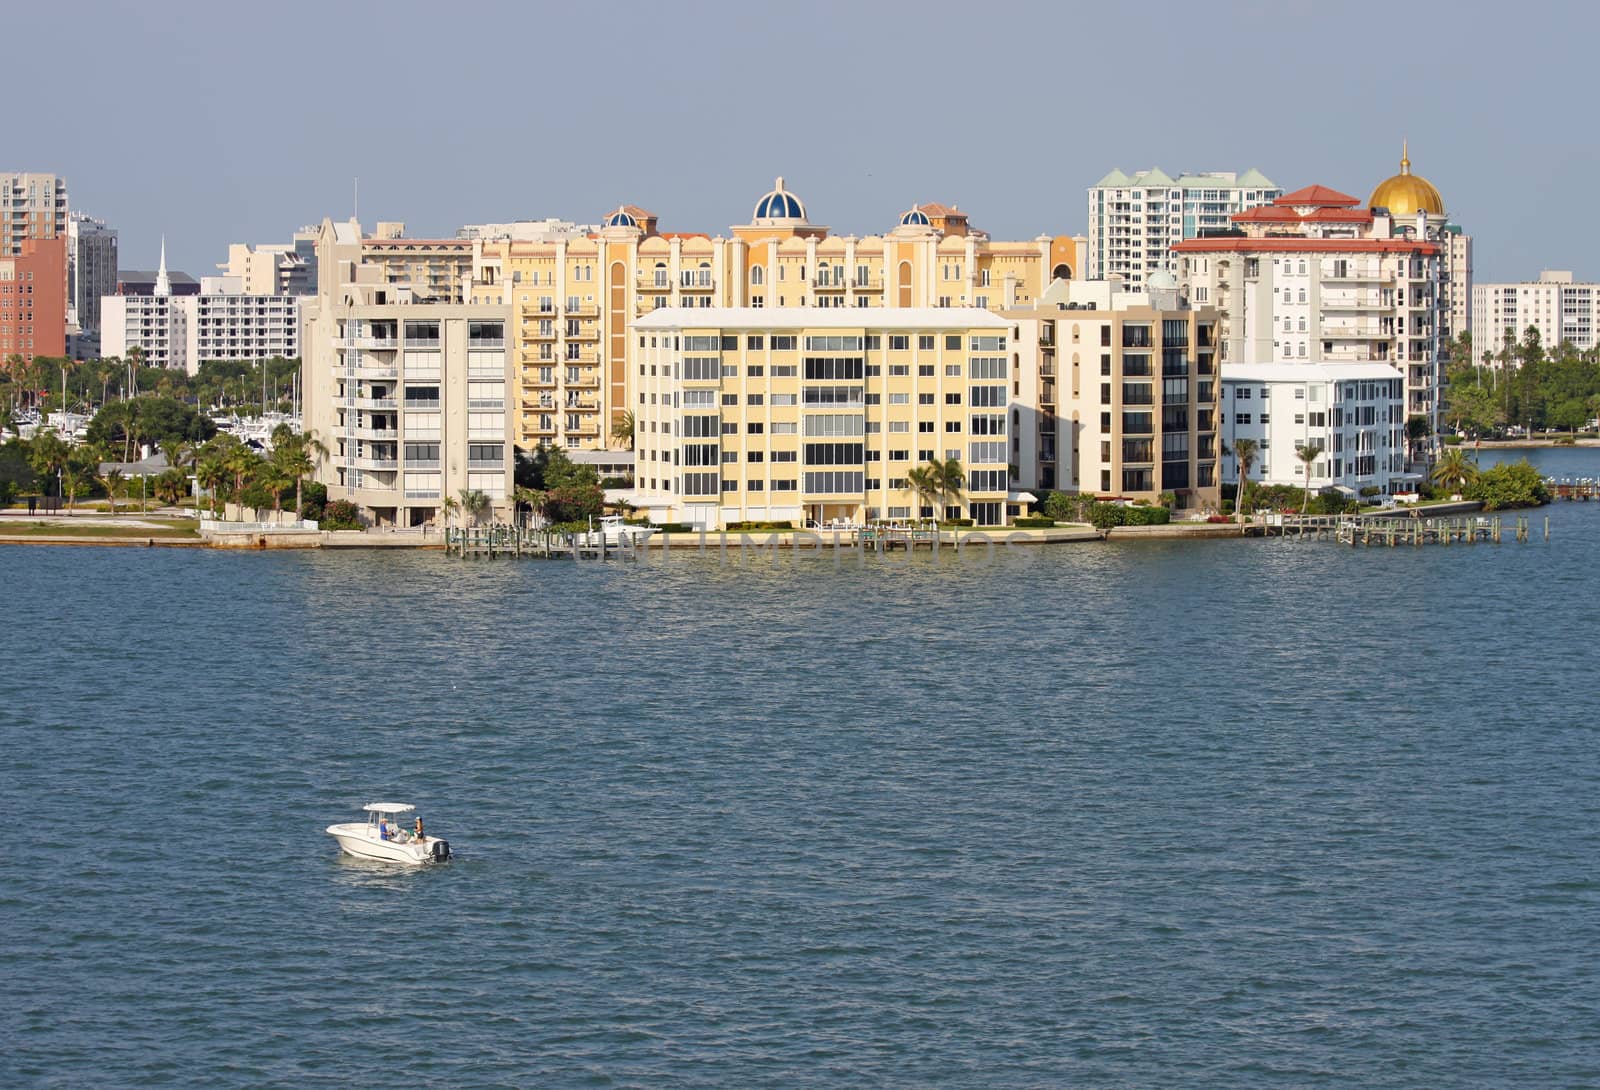 Partial skyline of Sarasota, Florida, viewed from the water by sgoodwin4813